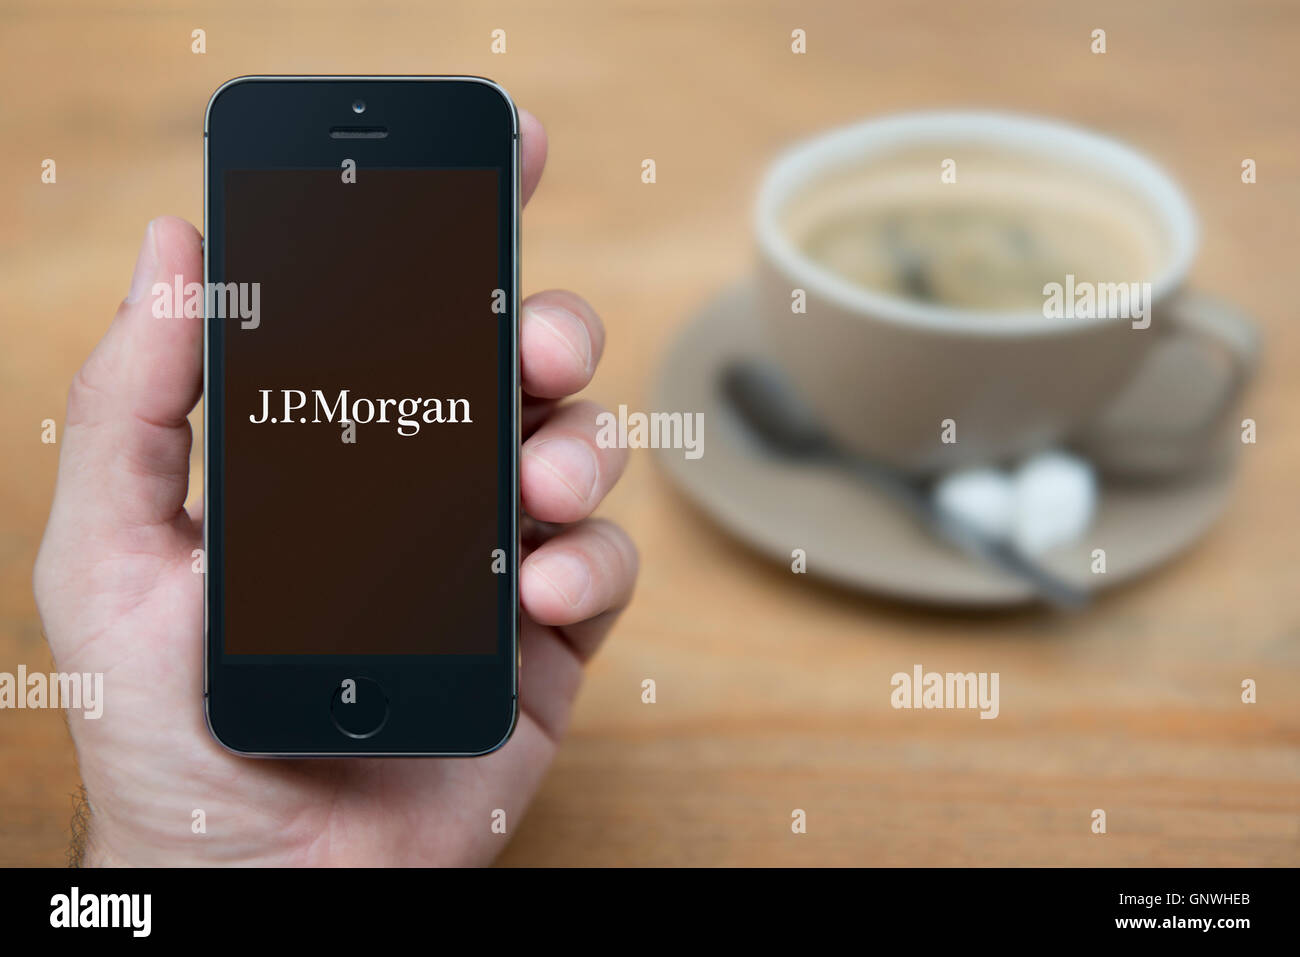 A man looks at his iPhone which displays the J. P. Morgan bank logo, while sat with a cup of coffee (Editorial use only). Stock Photo